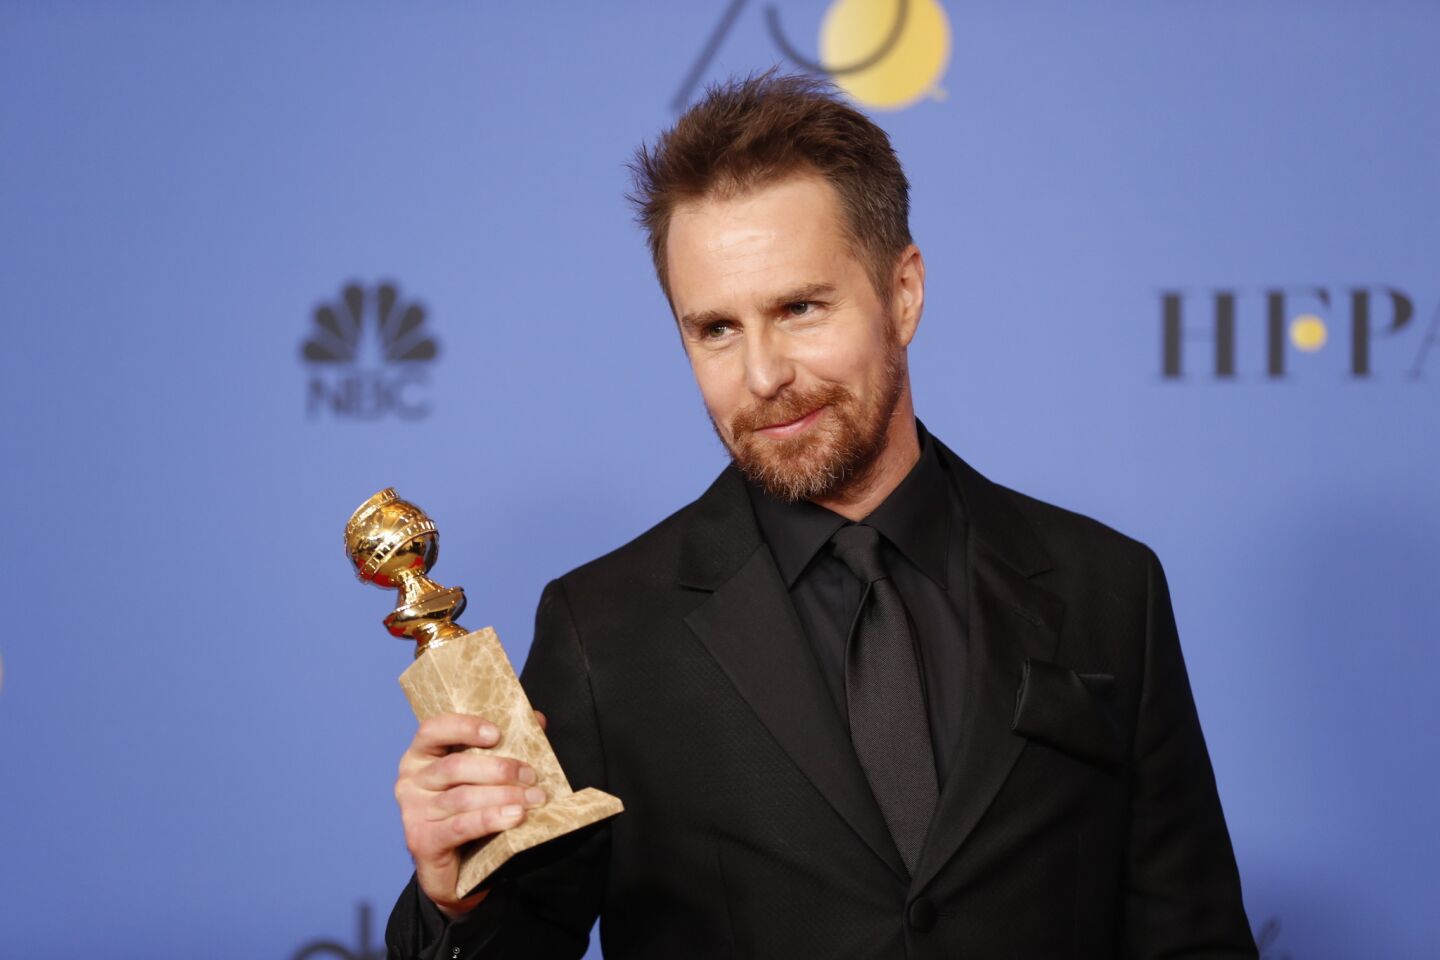 Sam Rockwell displays his award for supporting actor in a film for "Three Billboards Outside Hibbing, Missouri."